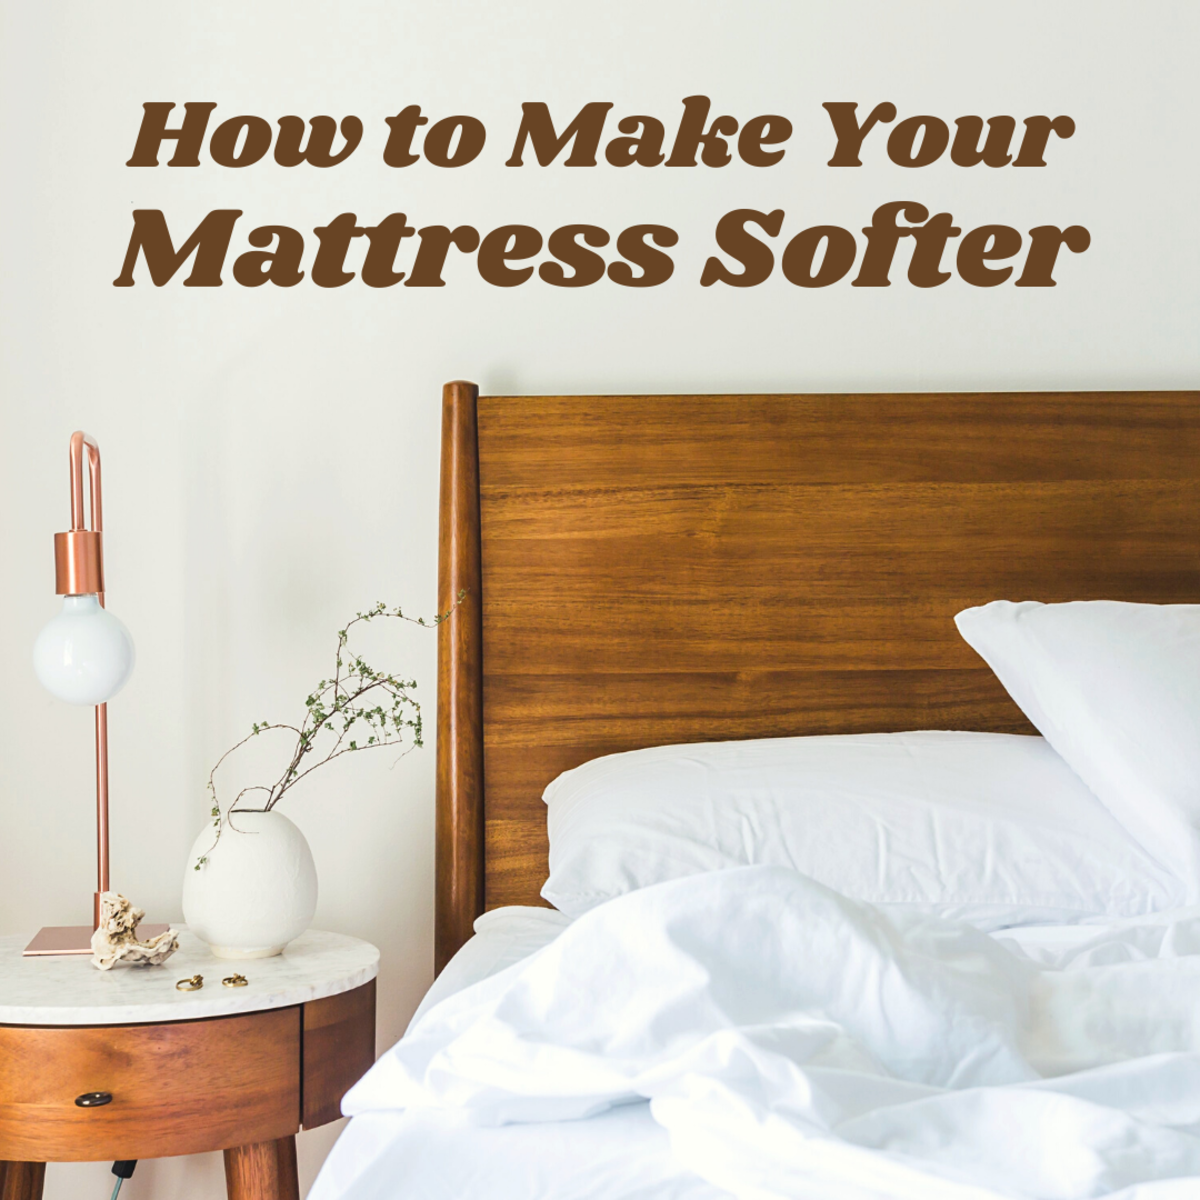 Is your mattress too firm? Here's how you can make it softer!